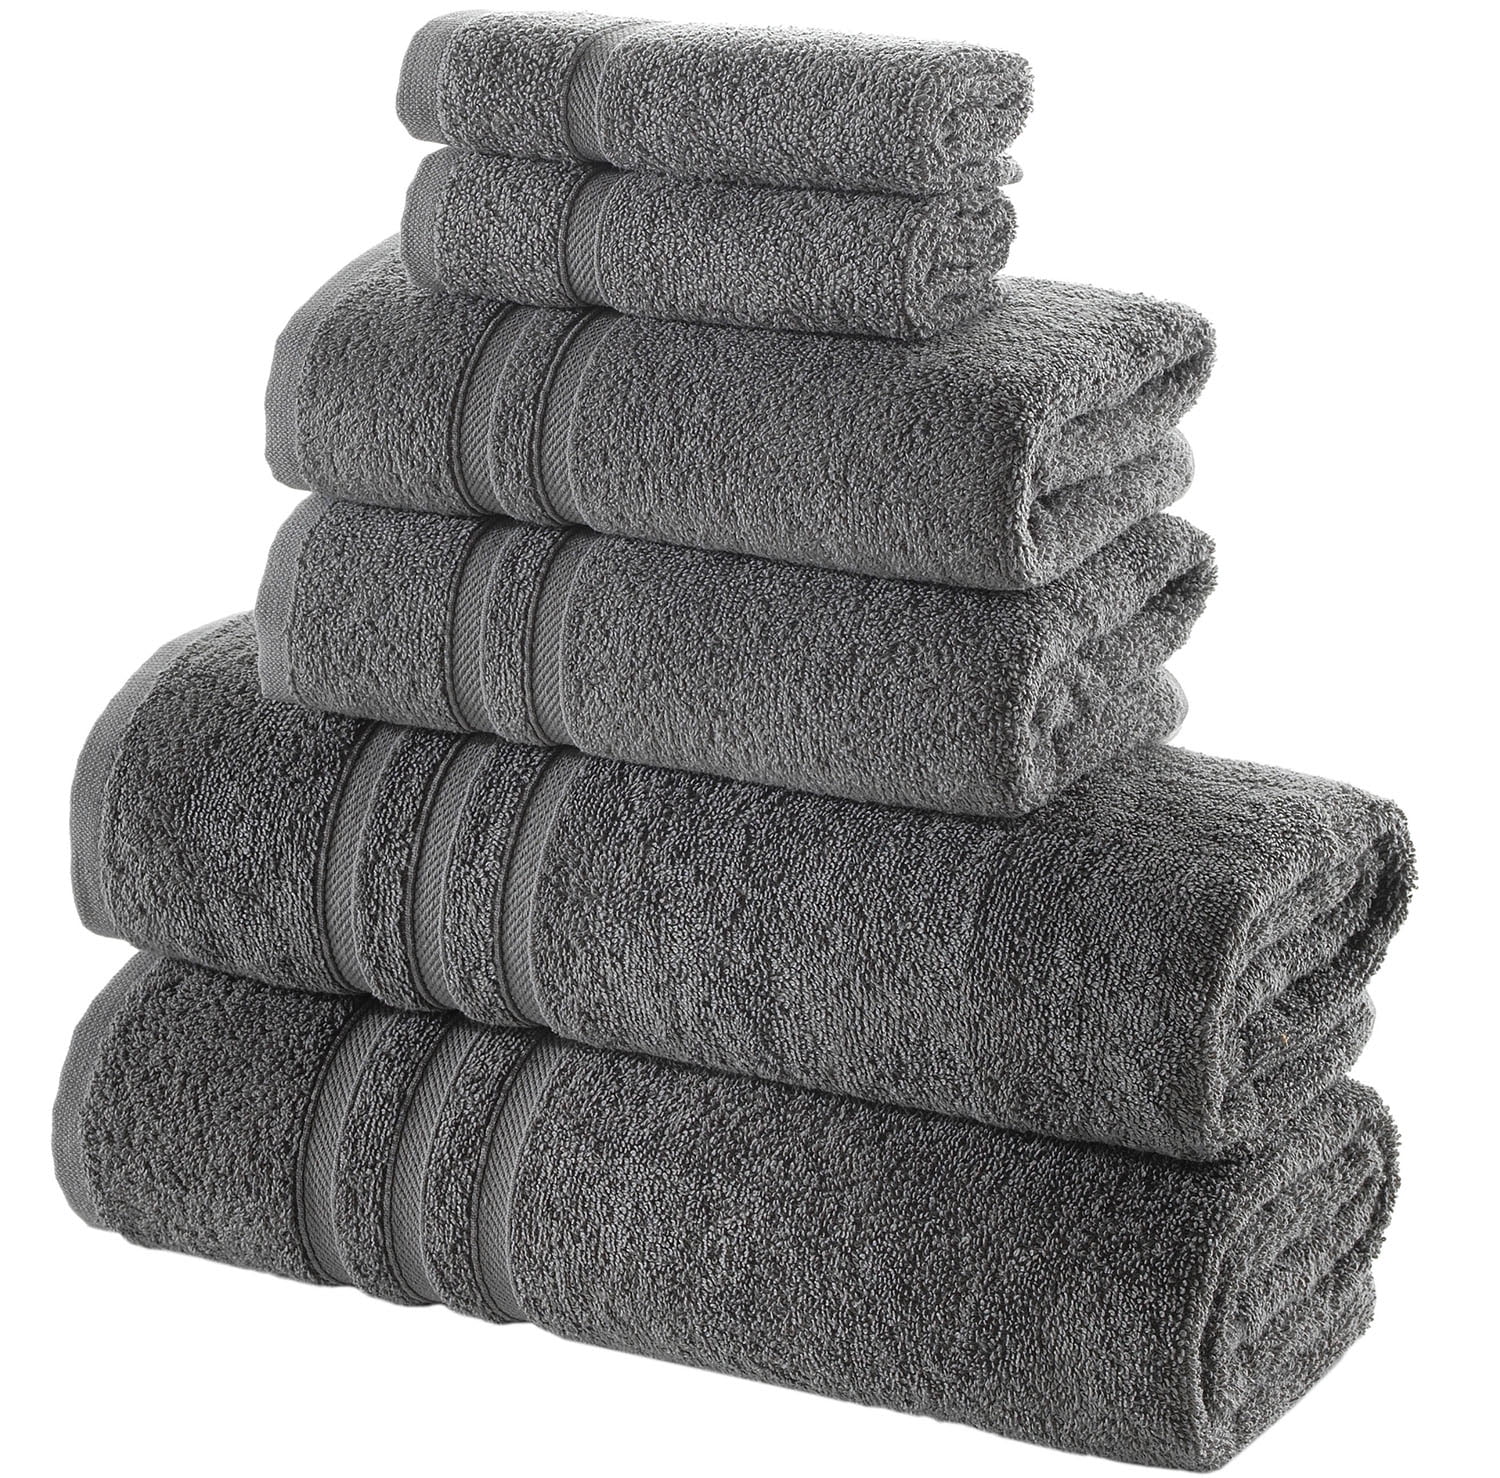 The Hammam Linen Cotton Towels Are 49% Off at